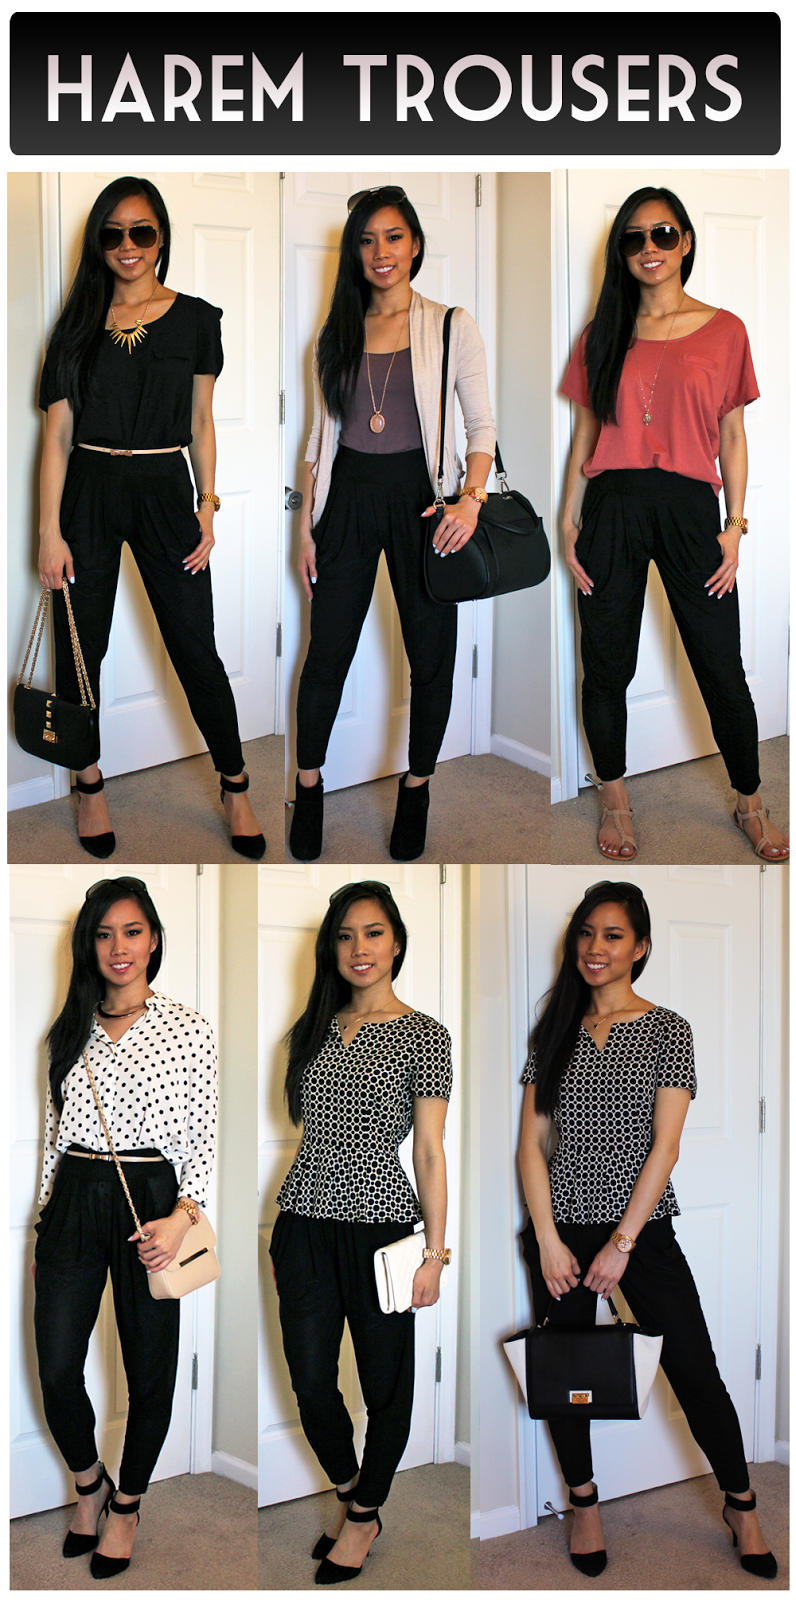 Be Linspired: How to Style Harem Pants